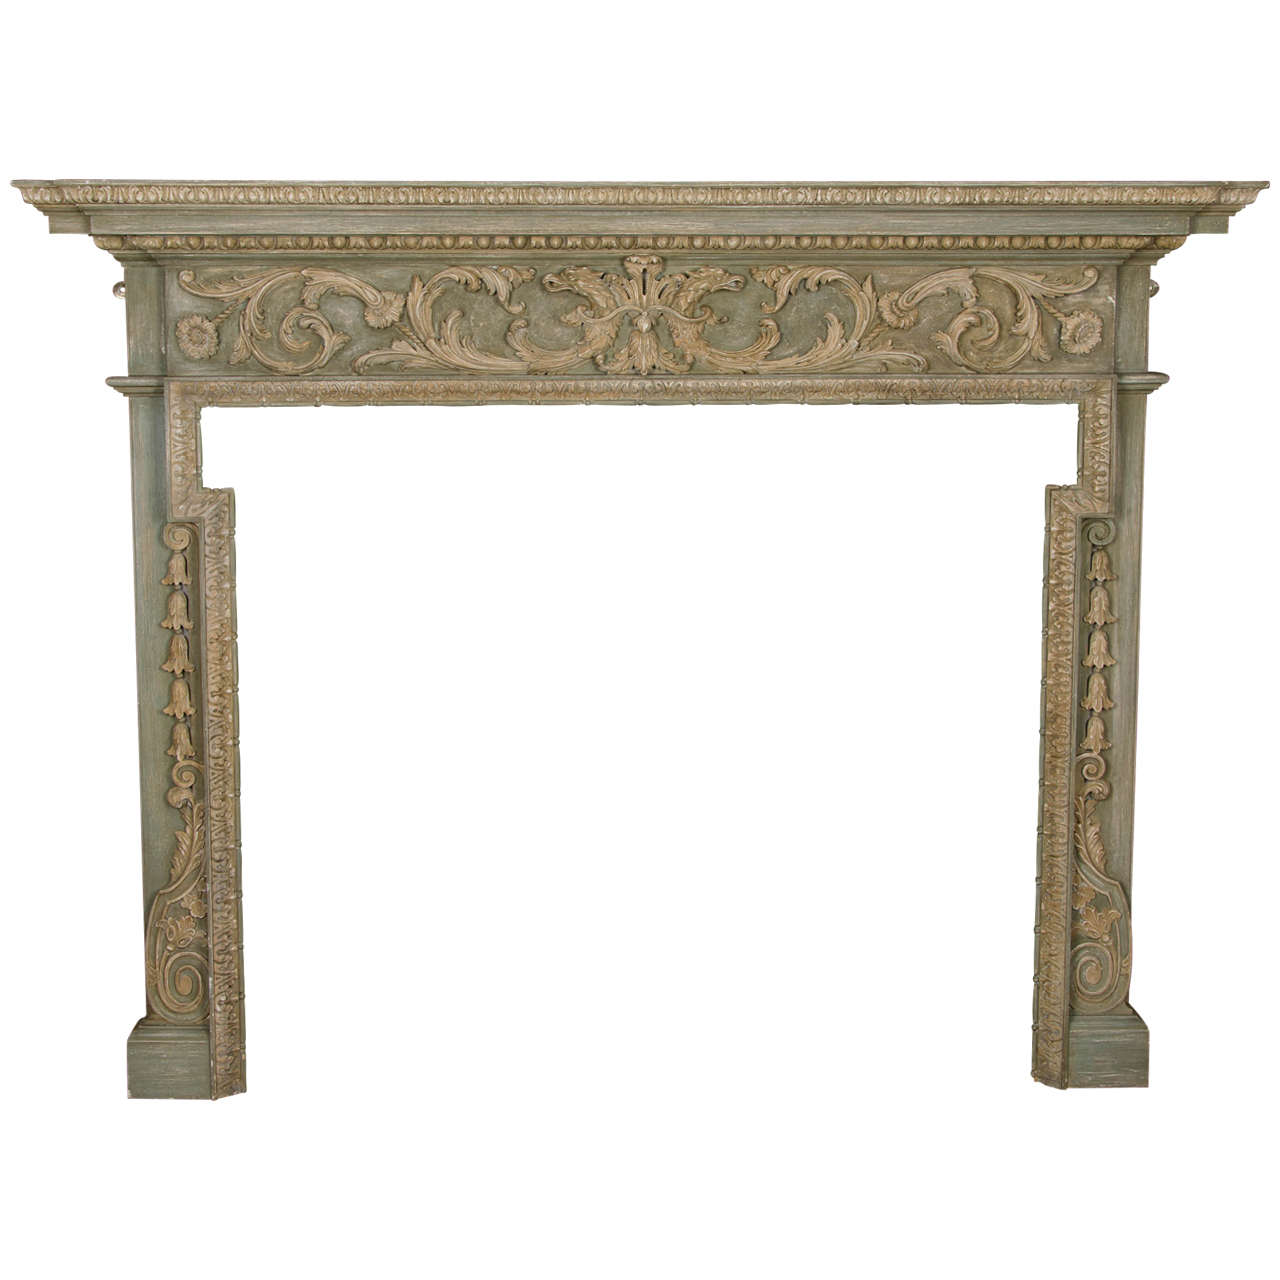 Georgian Style Carved Wooden Fire Surround